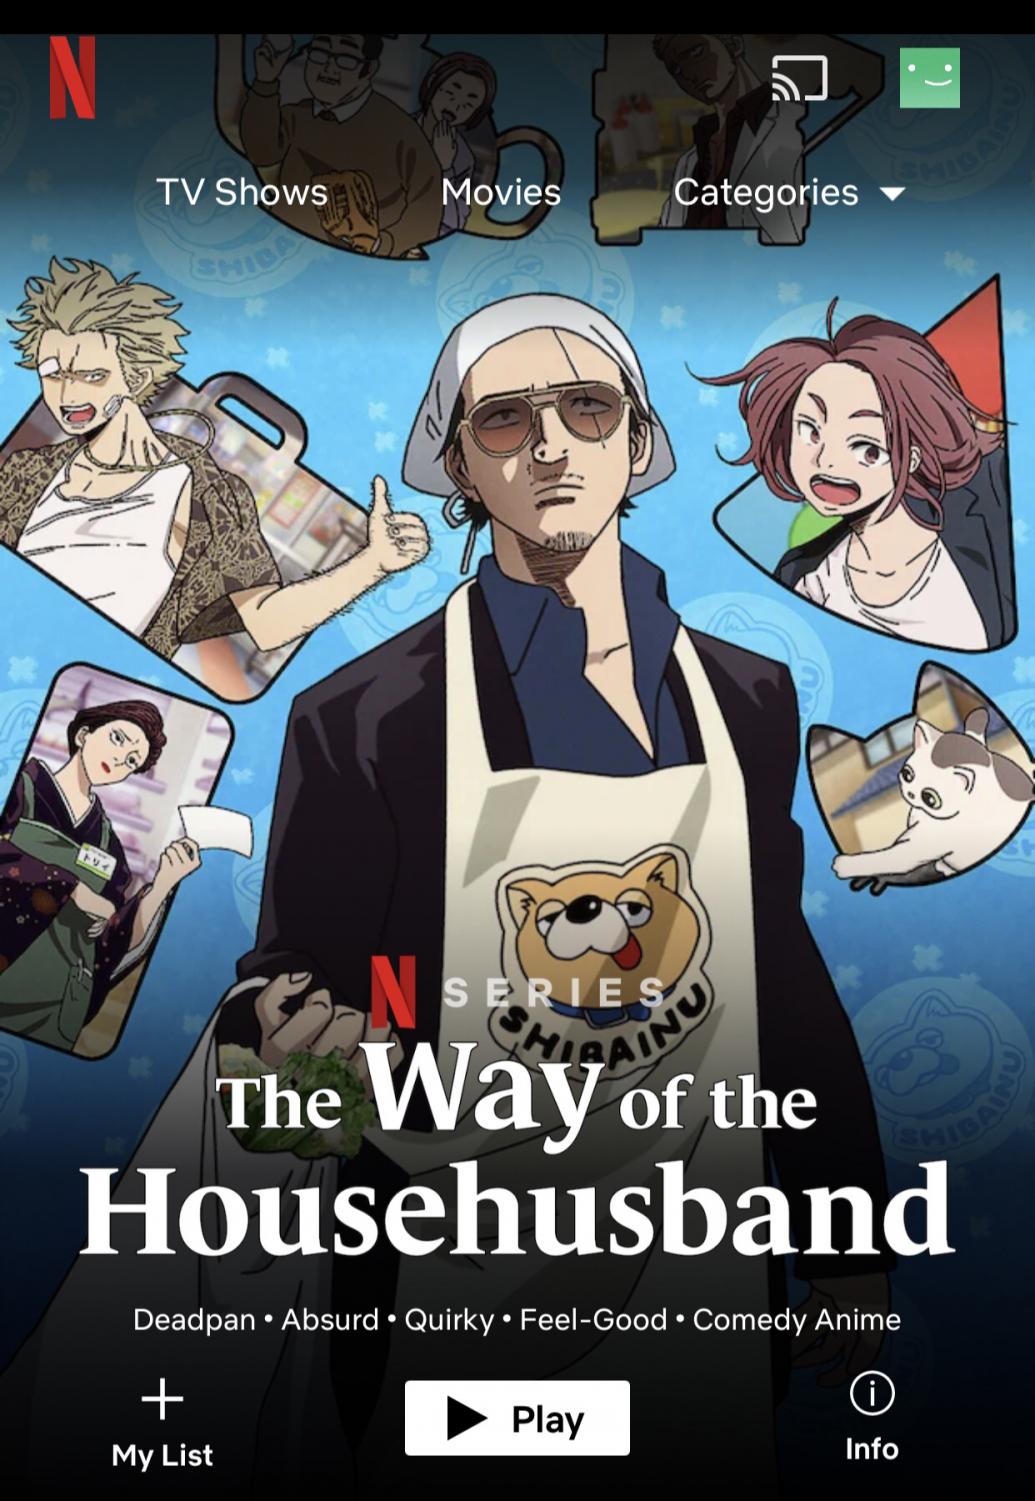 Way of the Househusband book and its anime recipes | ONE Esports-demhanvico.com.vn